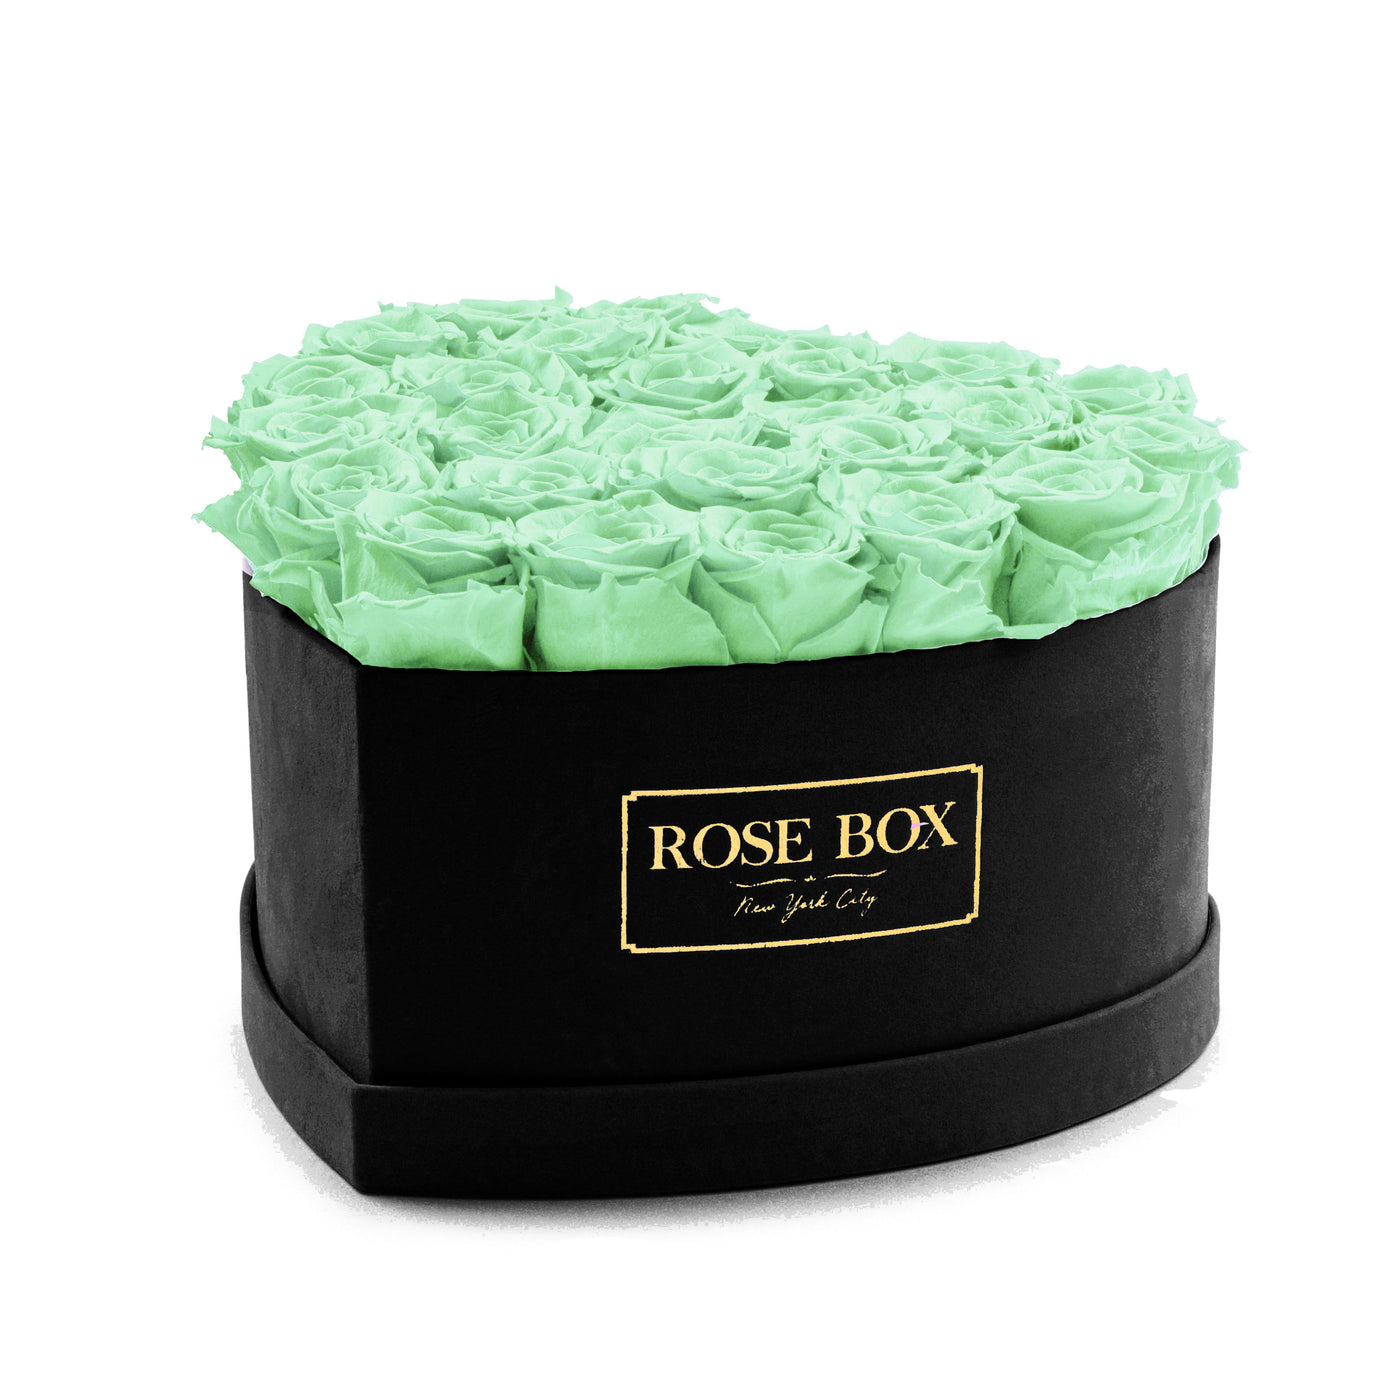 Large Black Heart Box with Light Green Roses